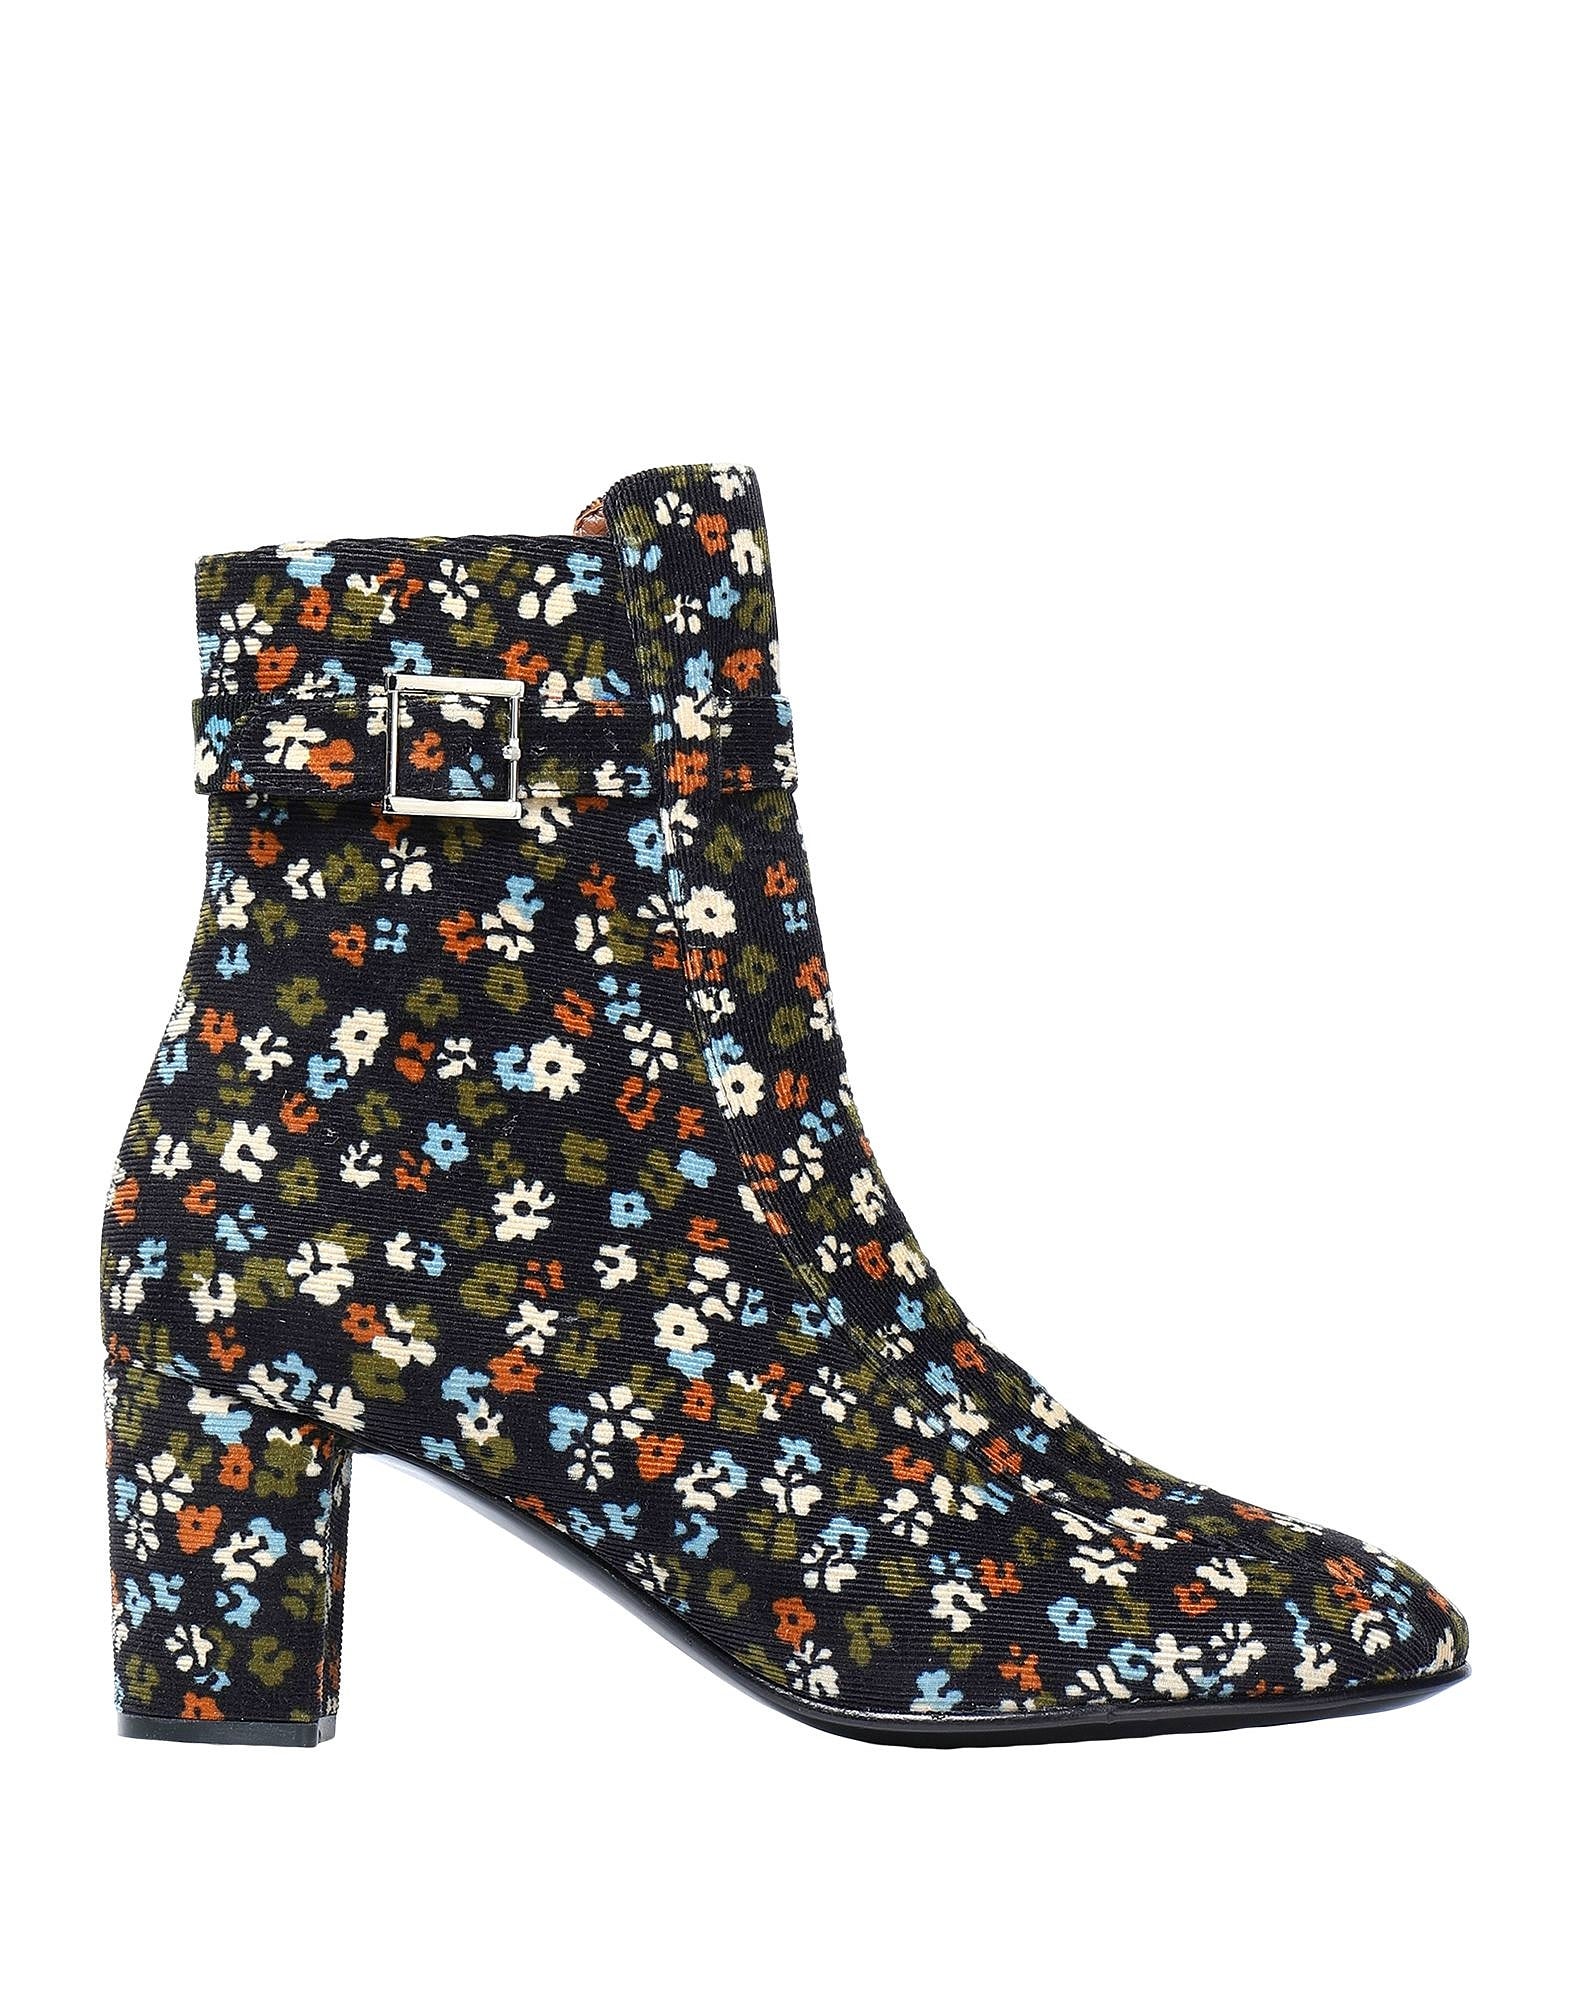 What I Screenshot This Week: The Floral Boots That Could Change The Game